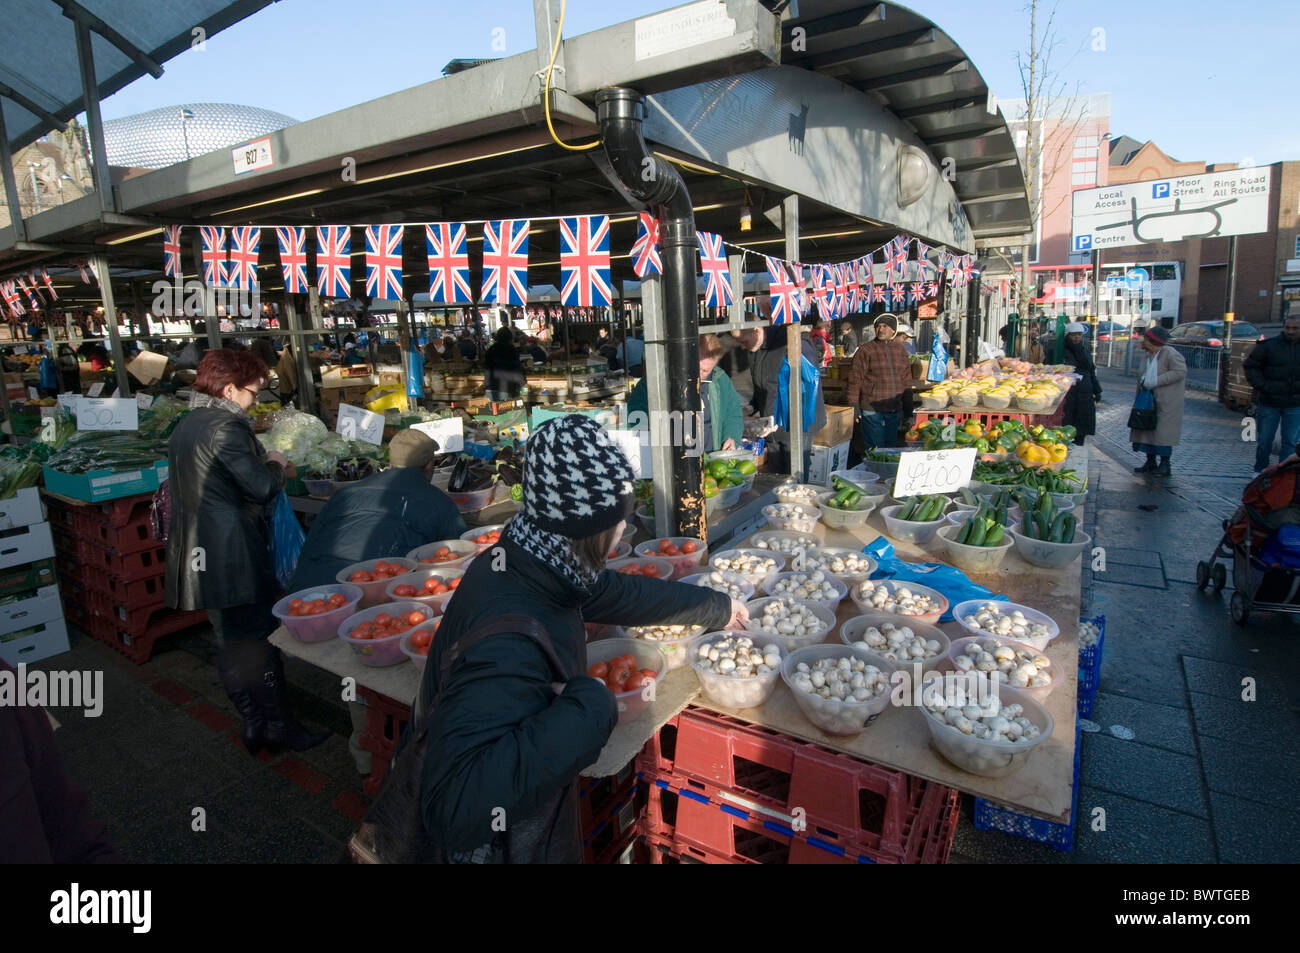 outdoor market stall stalls fresh fruit and veg vegetable vegetables trader traders retail retailer retailers open air openair s Stock Photo